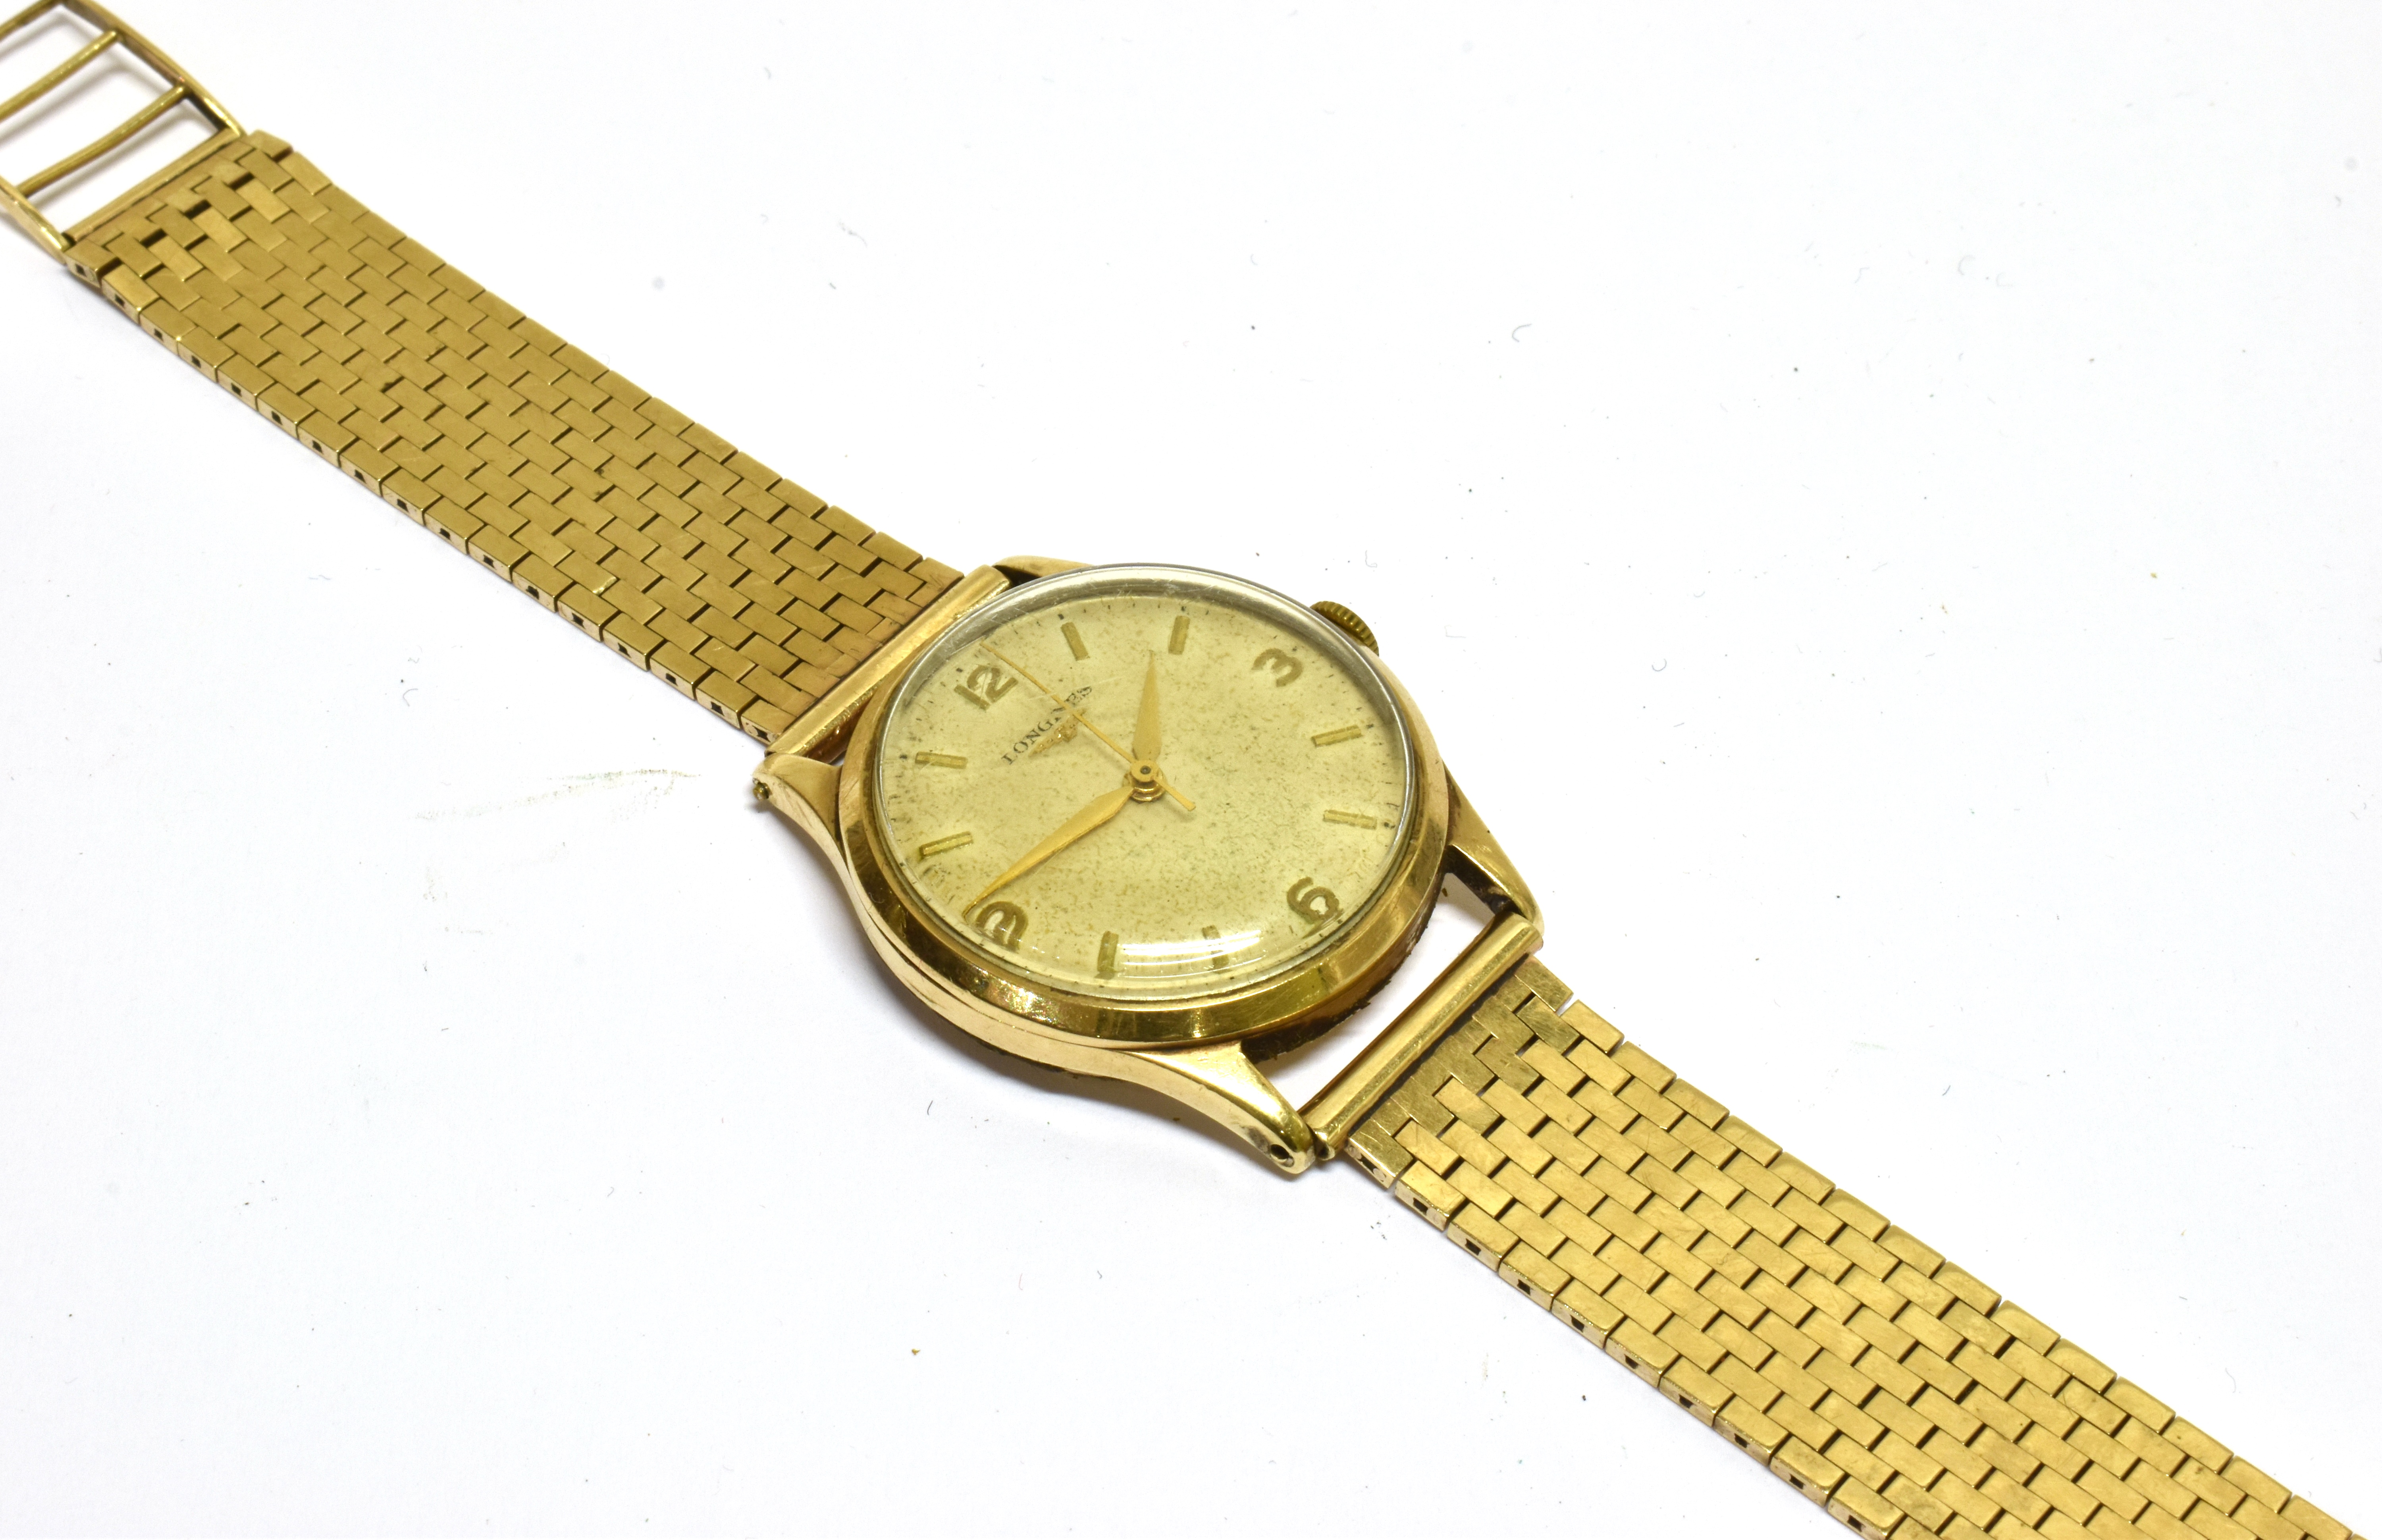 LONGINES, A GENTLEMAN'S 9CT GOLD ROUND BRACELET WATCH, CIRCA 1956 cream dial with baton numerals and - Image 2 of 2